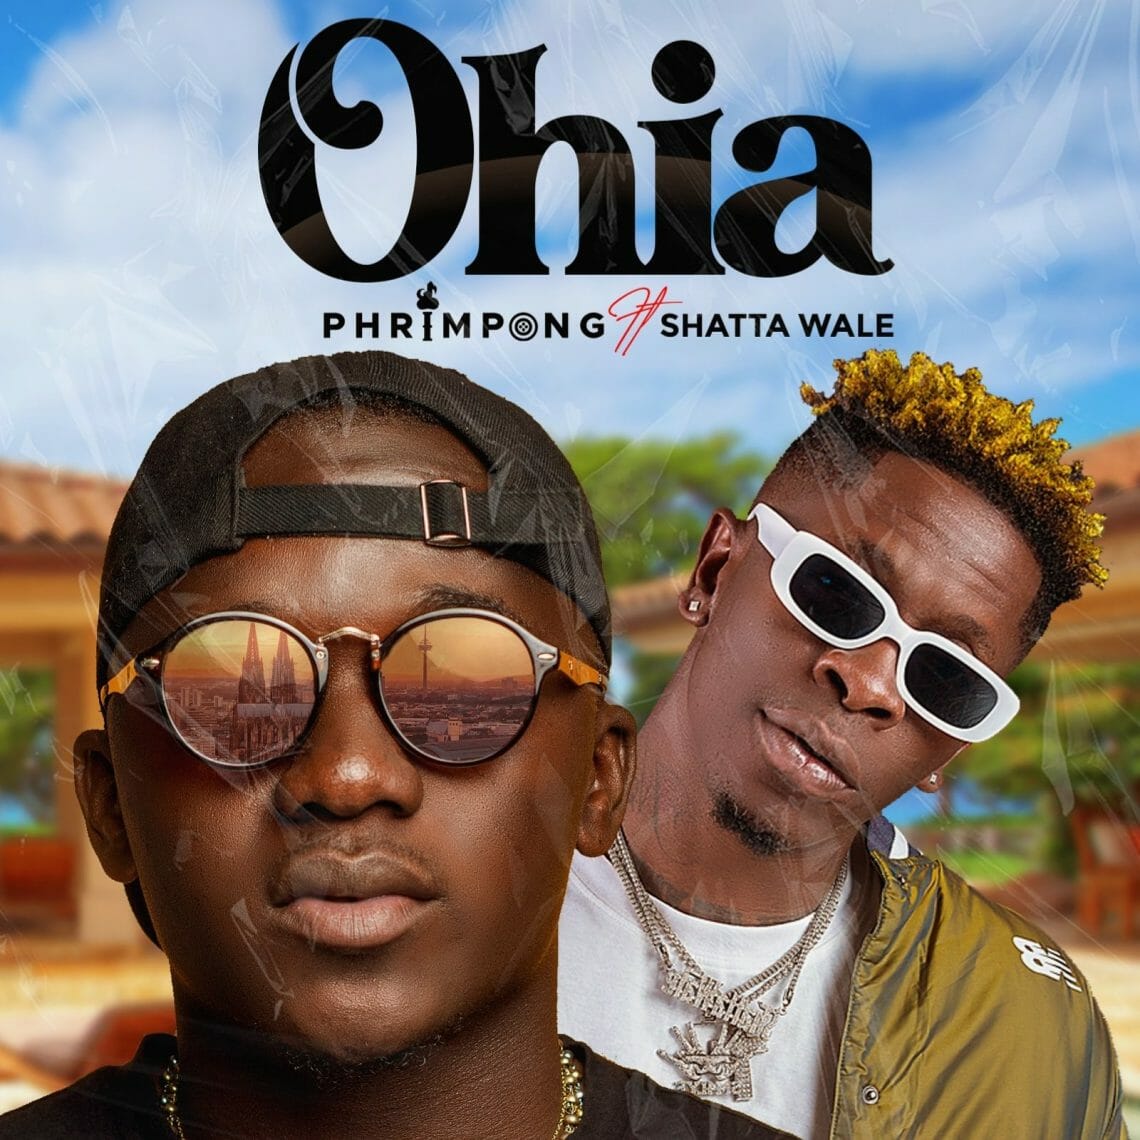 DOWNLOAD Phrimpong Ohia Ft. Shatta Wale MP3